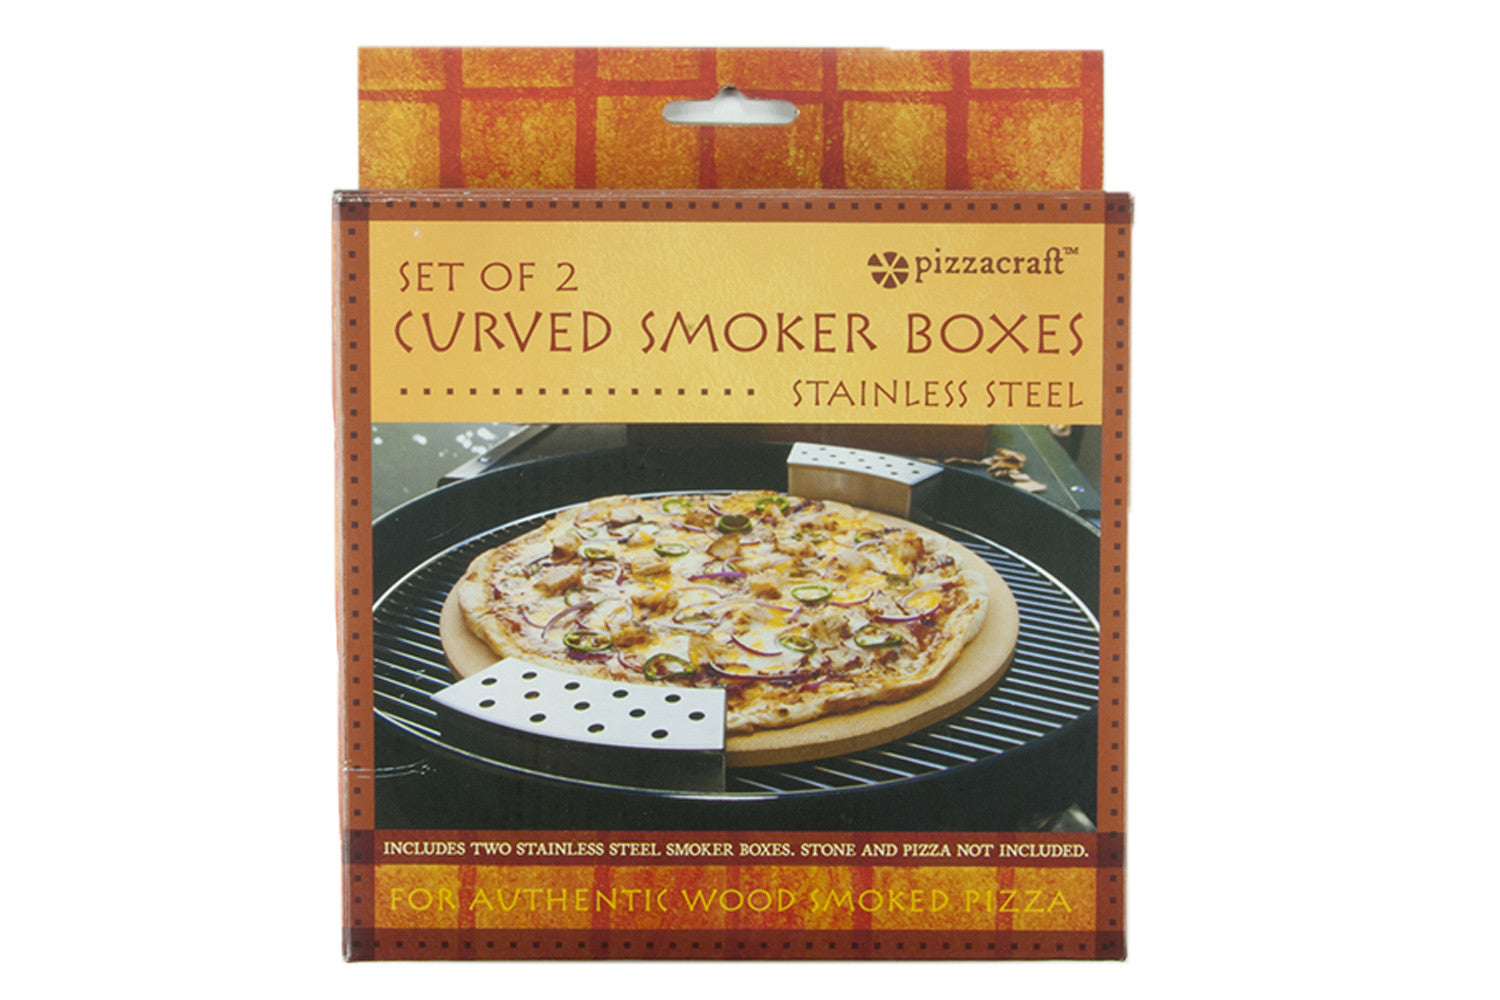 Packaging for Curved Smoker Box Set